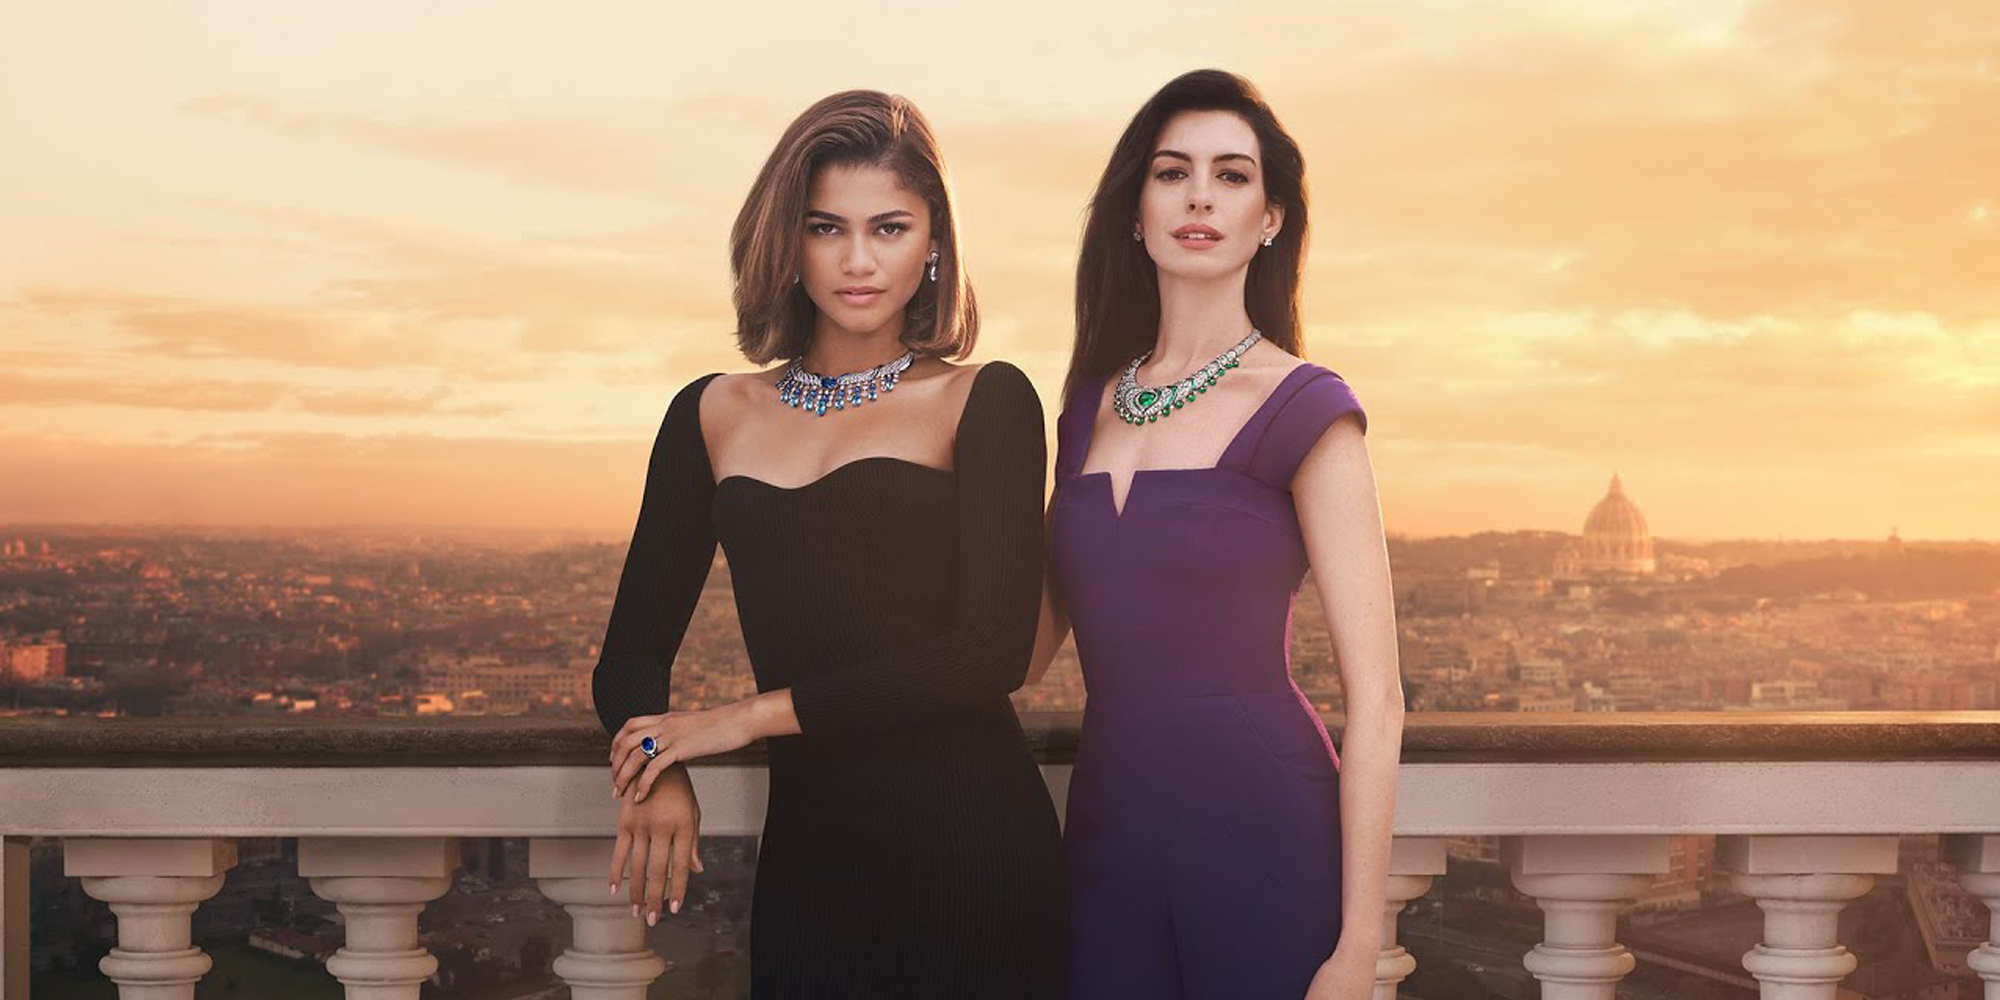 BULGARI 'MAGNIFICENCE NEVER ENDS' FILM STARRING ANNE HATHAWAY AND ZENDAYA